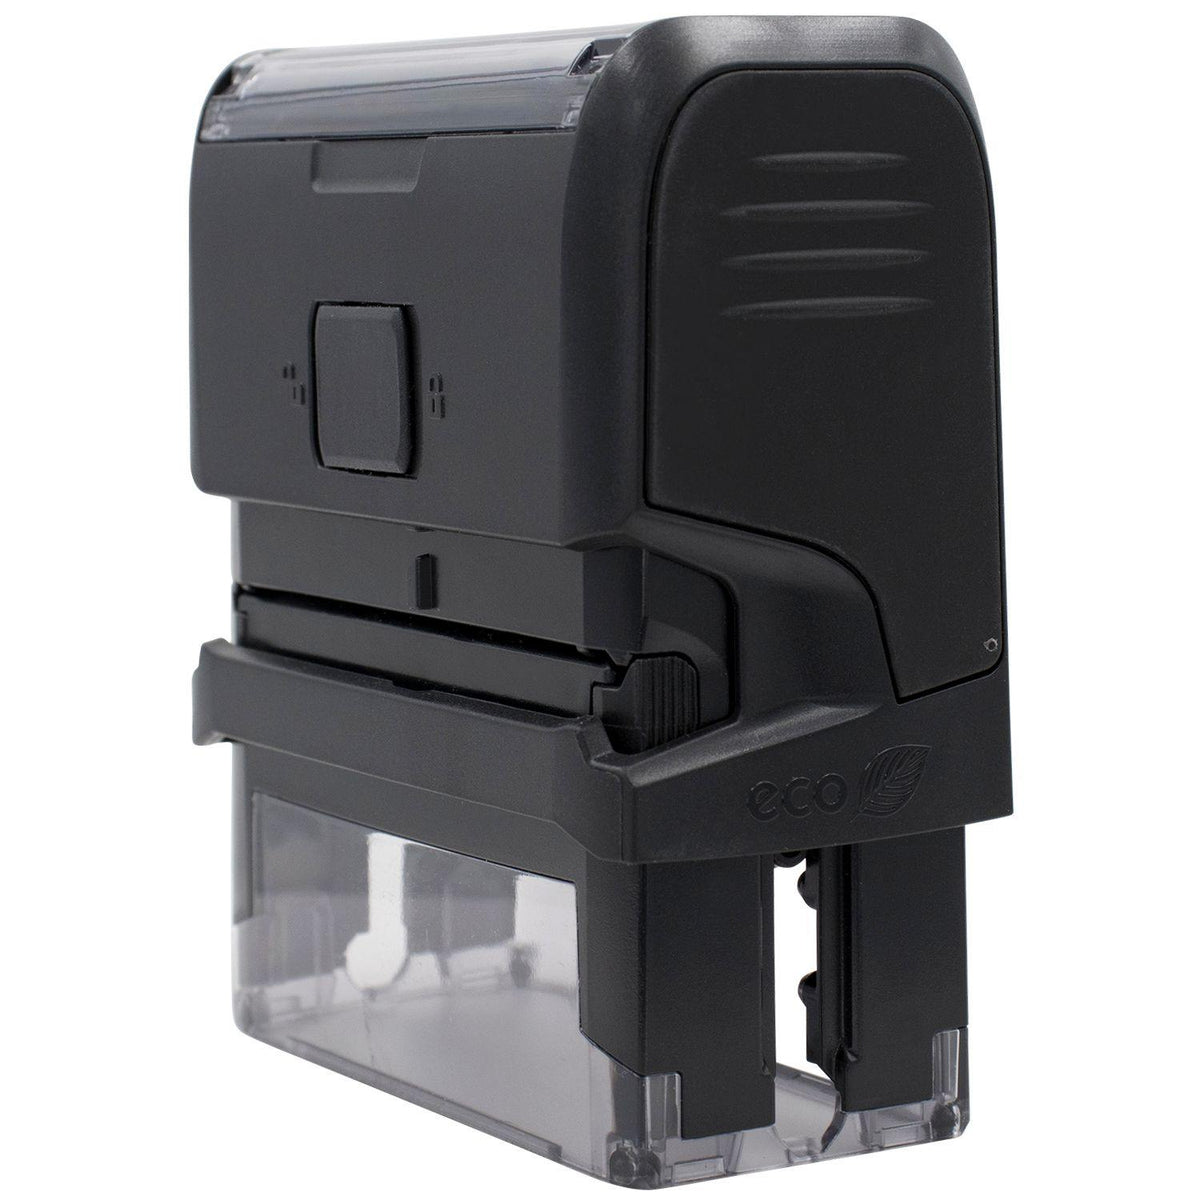 Side View of Large Self Inking Clients Copy Stamp at an Angle